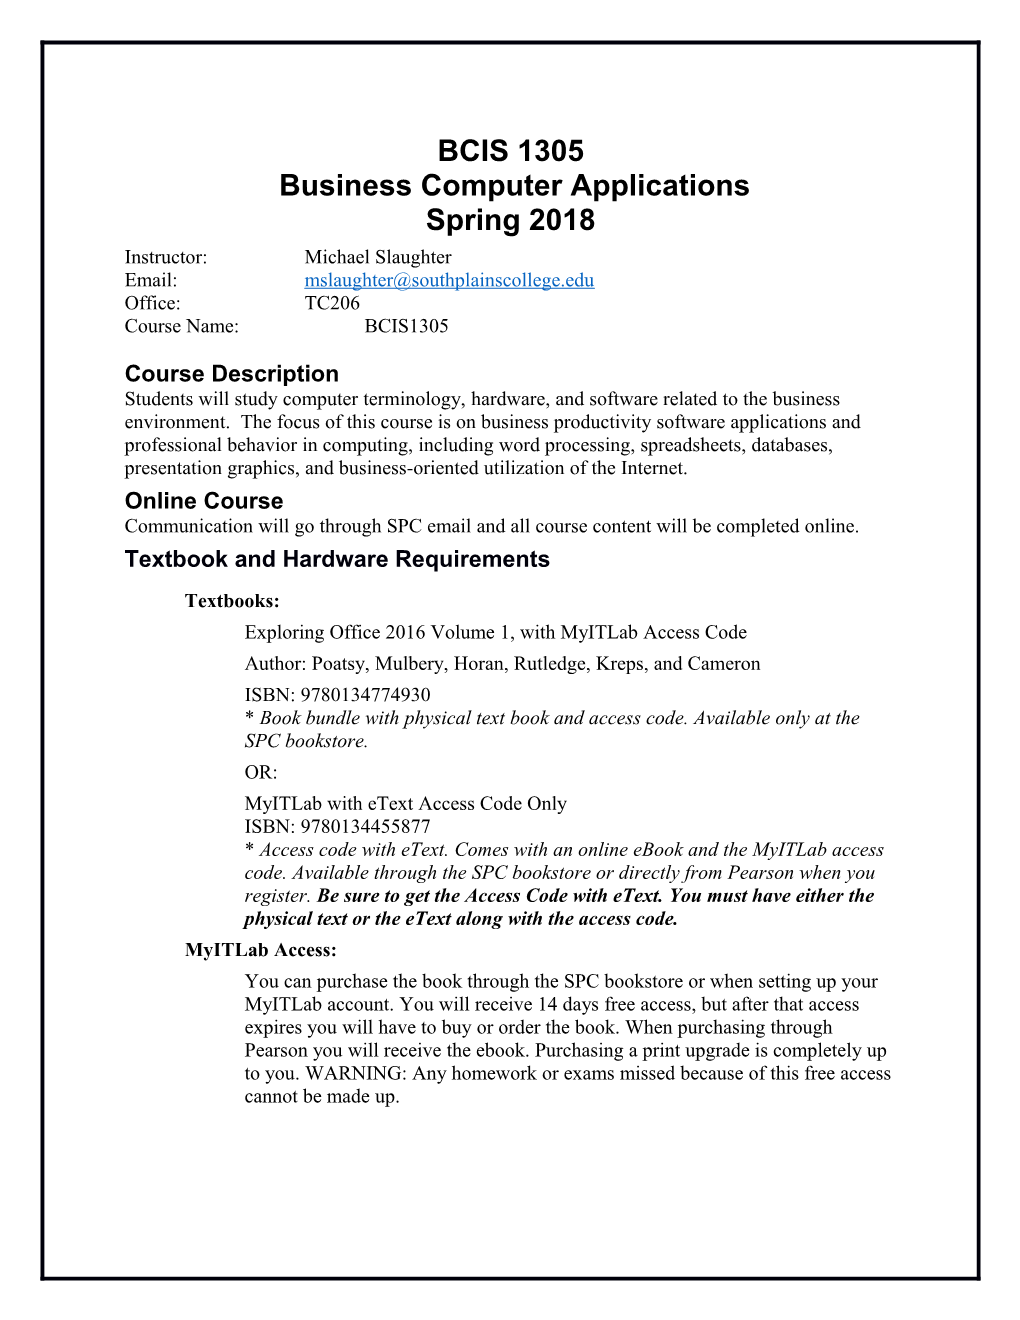 BCIS 1305 Business Computer Applications Spring 2018